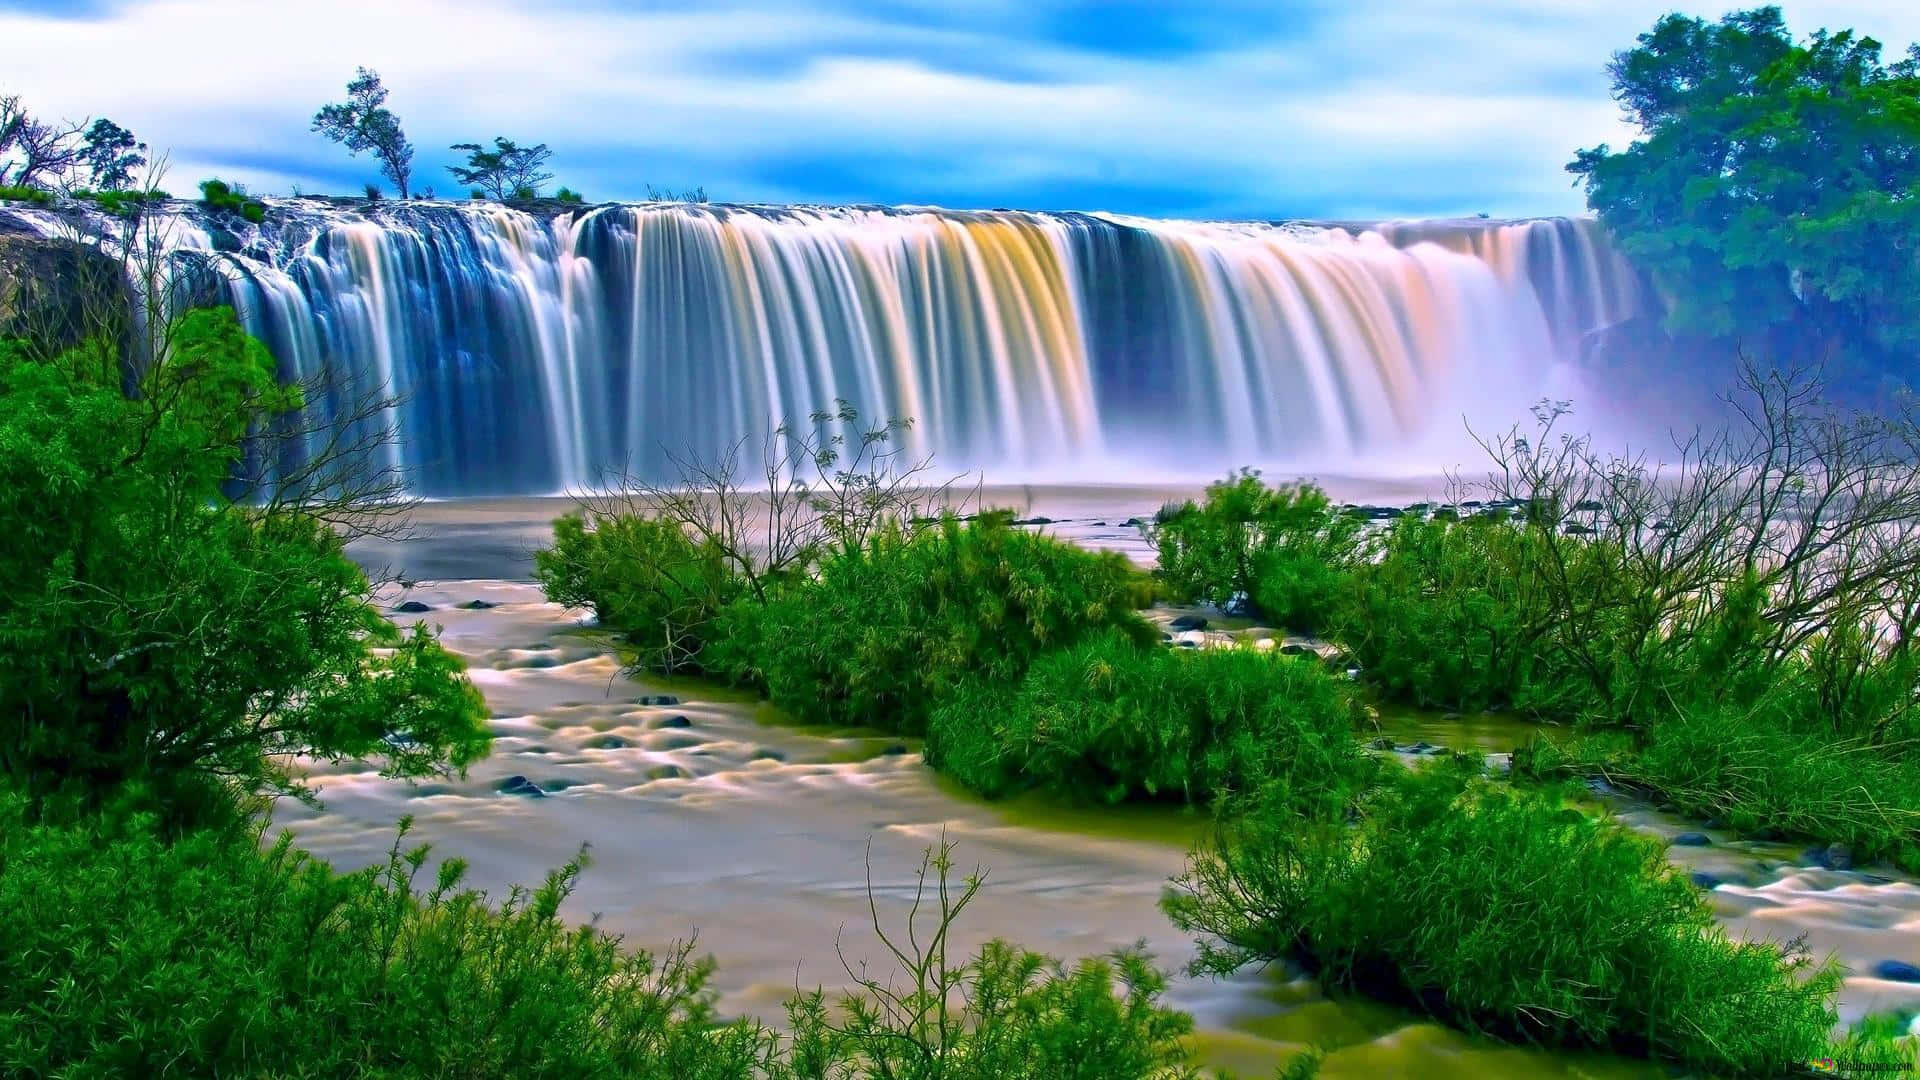 A powerful and majestic view of a beautiful waterfall